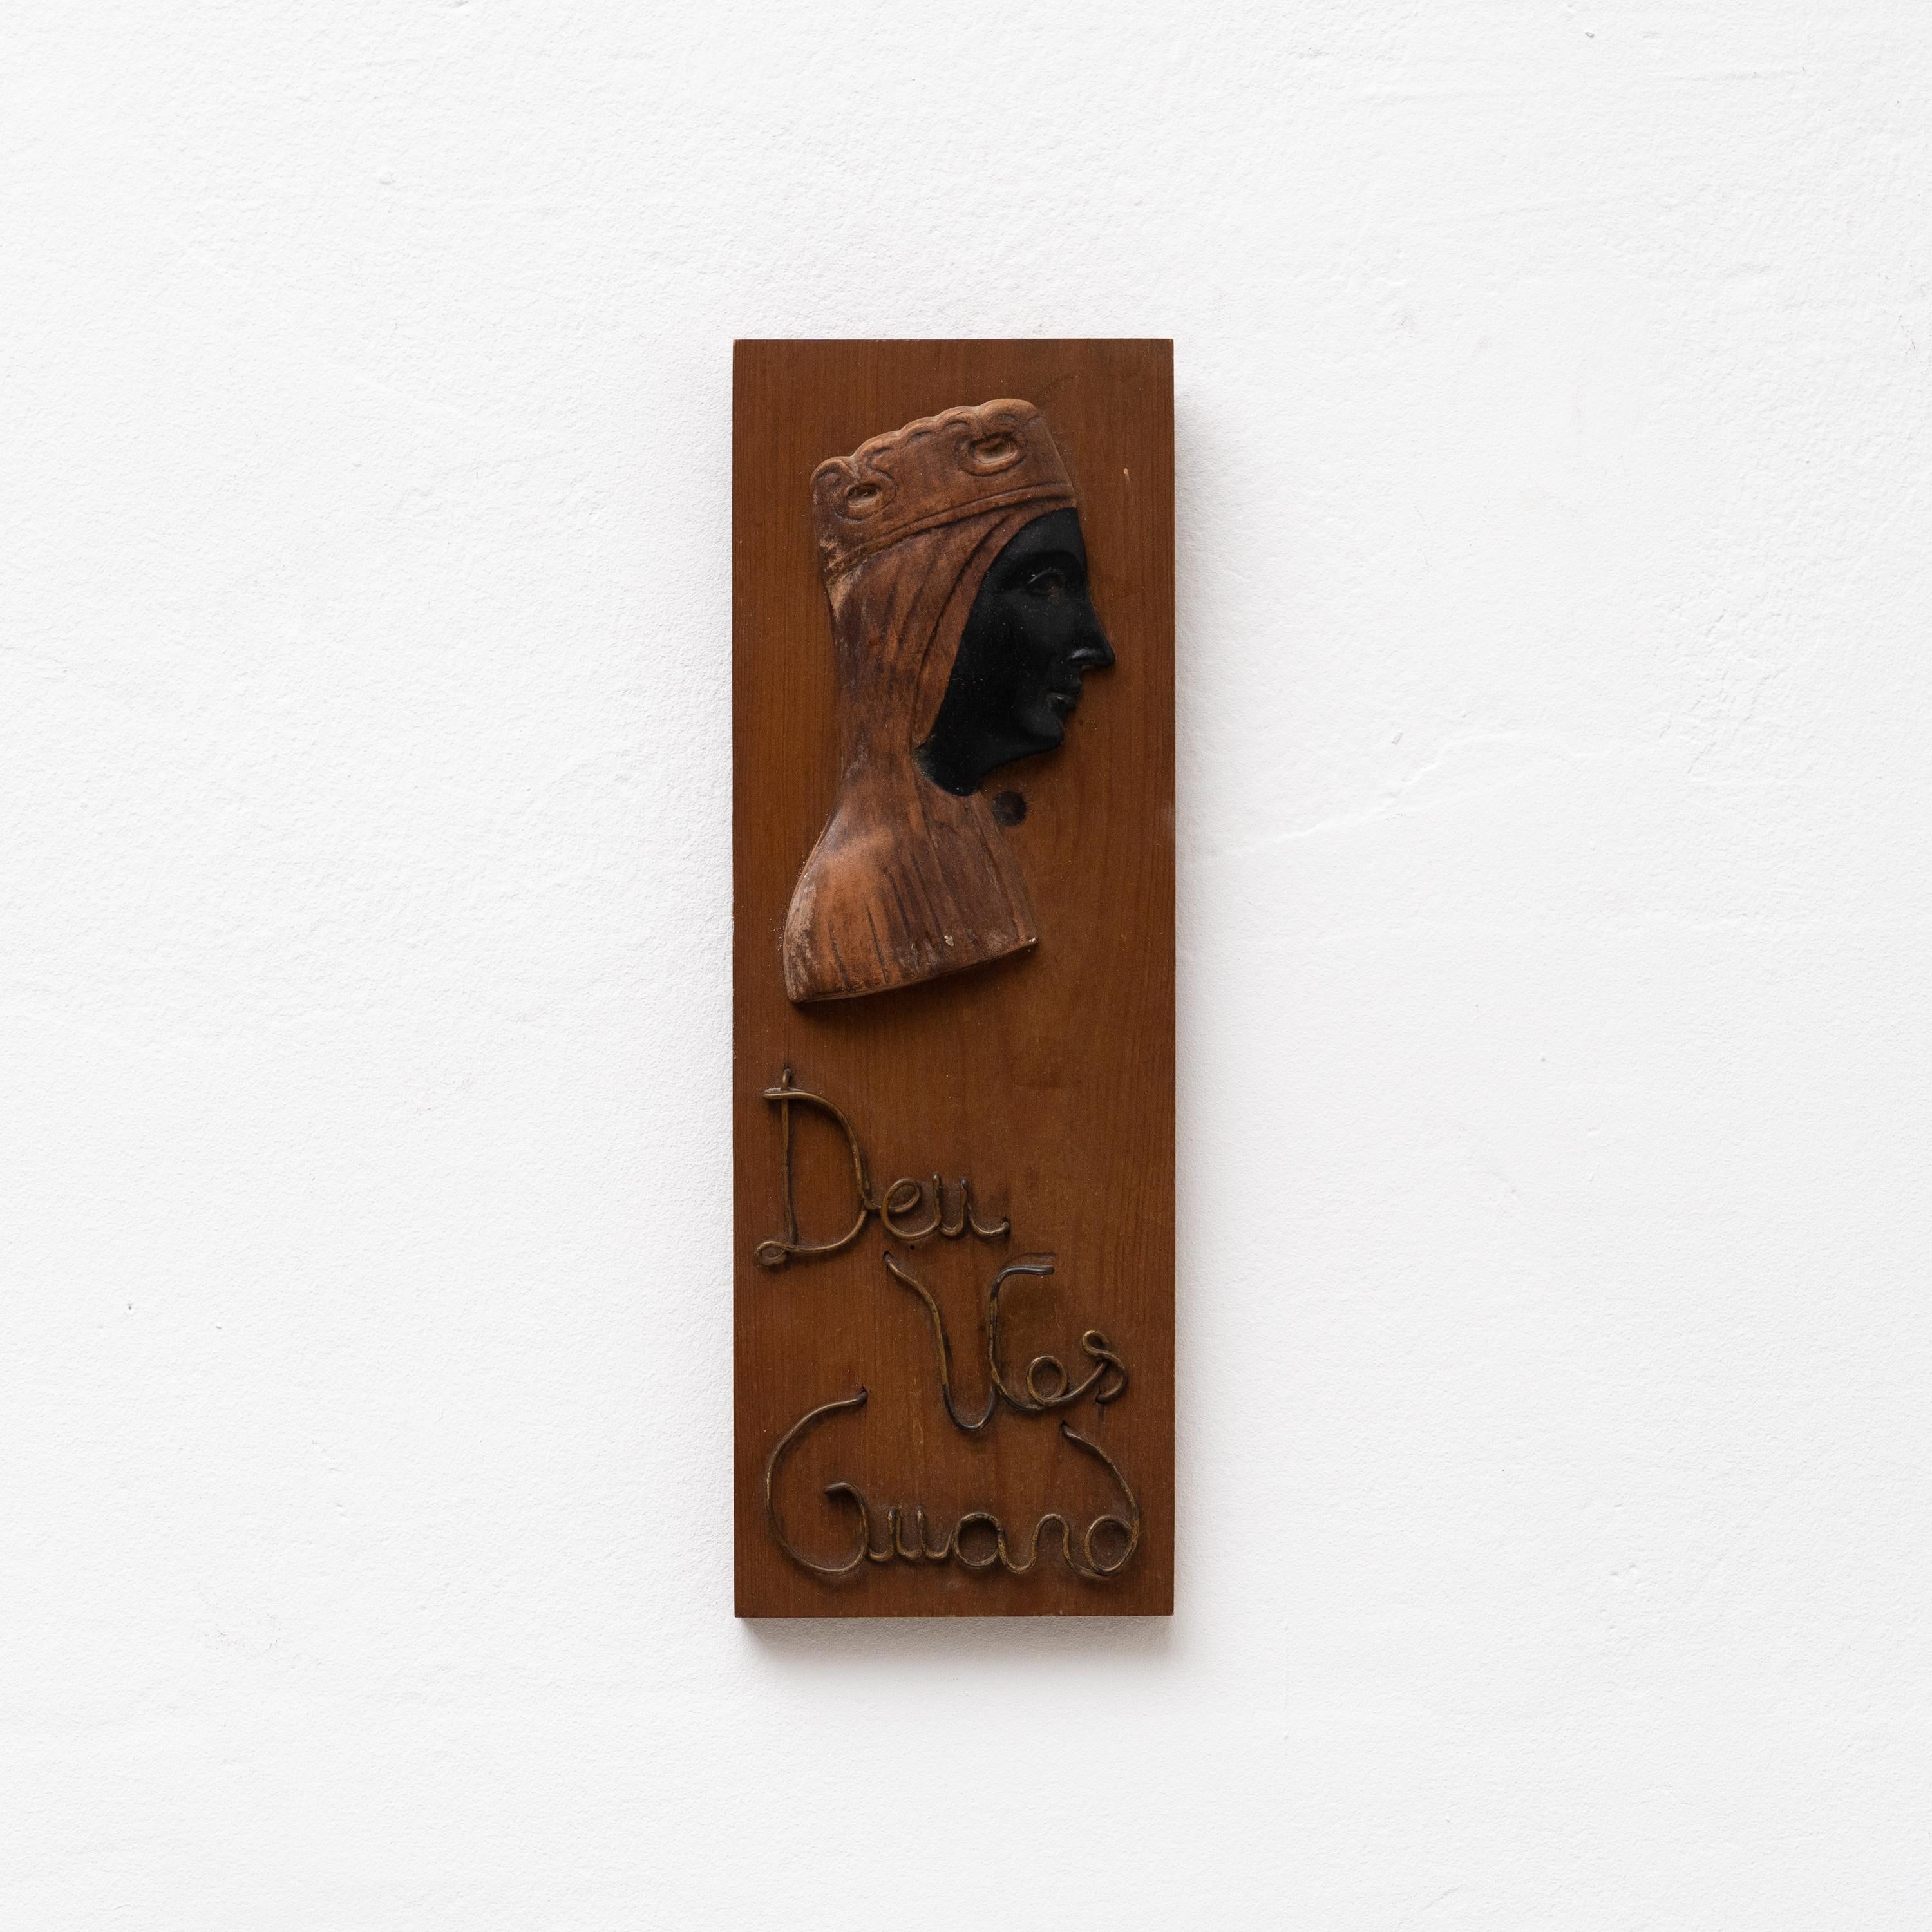 Traditional wooden Artwork wall Catalan Religious Virgin La Moreneta.

Hand Made in Catalonia, 1990.

In original condition, with minor wear consistent with age and use, preserving a beautiful patina.

Materials:
Wood.